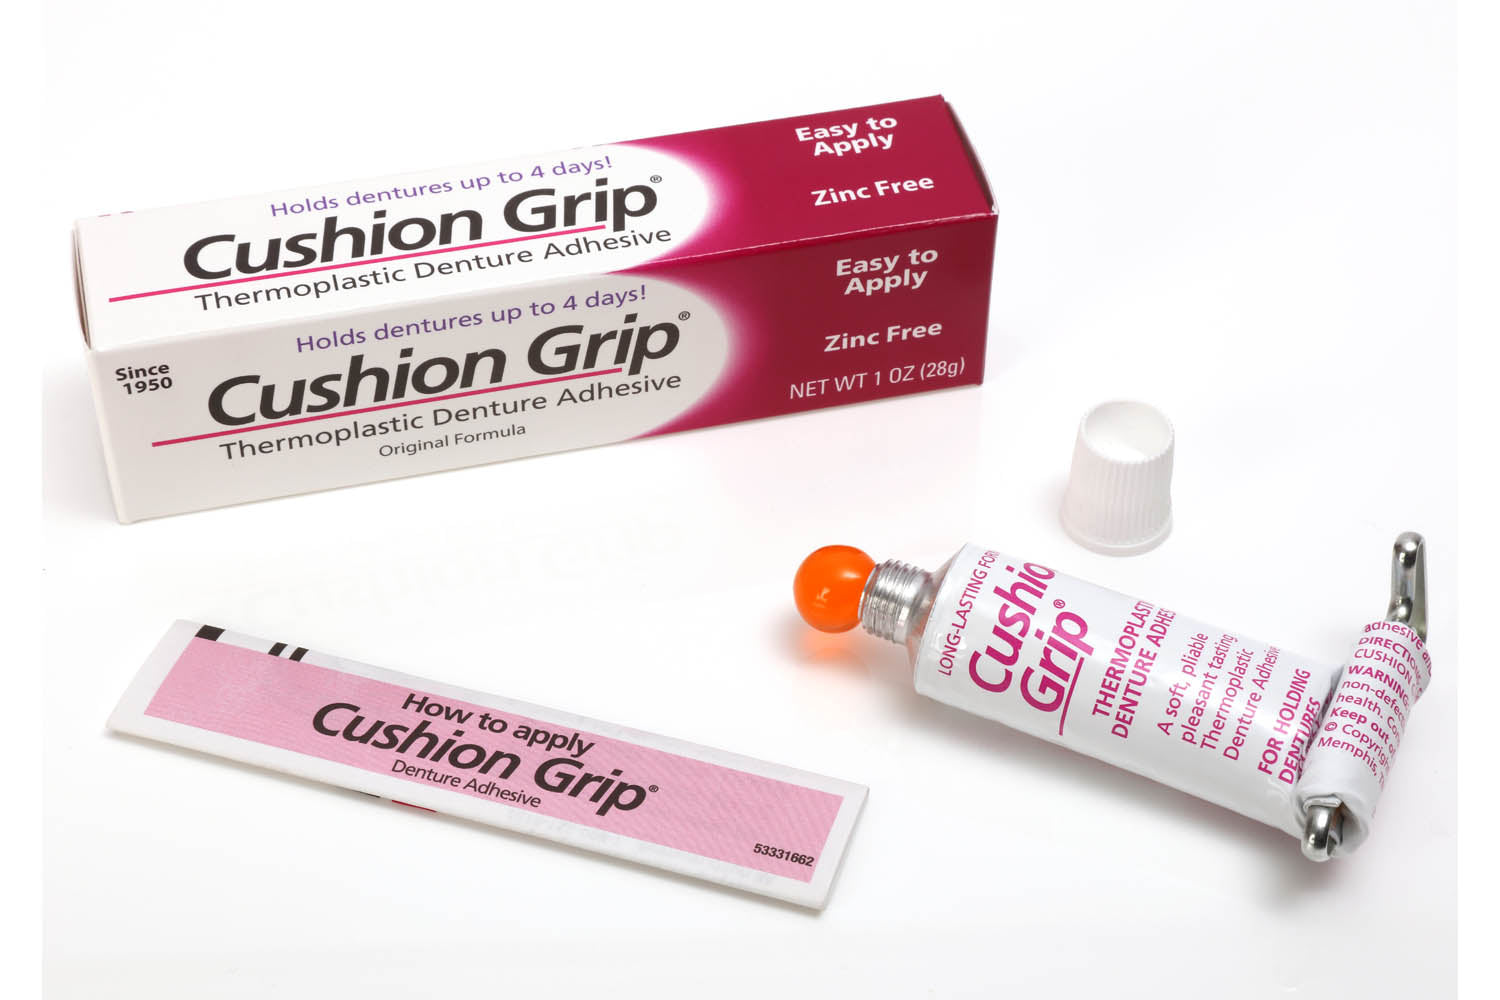 Cushion Grip Denture Adhesive is a product that cushions your gum with long-lasting adhesion. Here's a list of what makes us stand out from the other dental adhesive on the market.